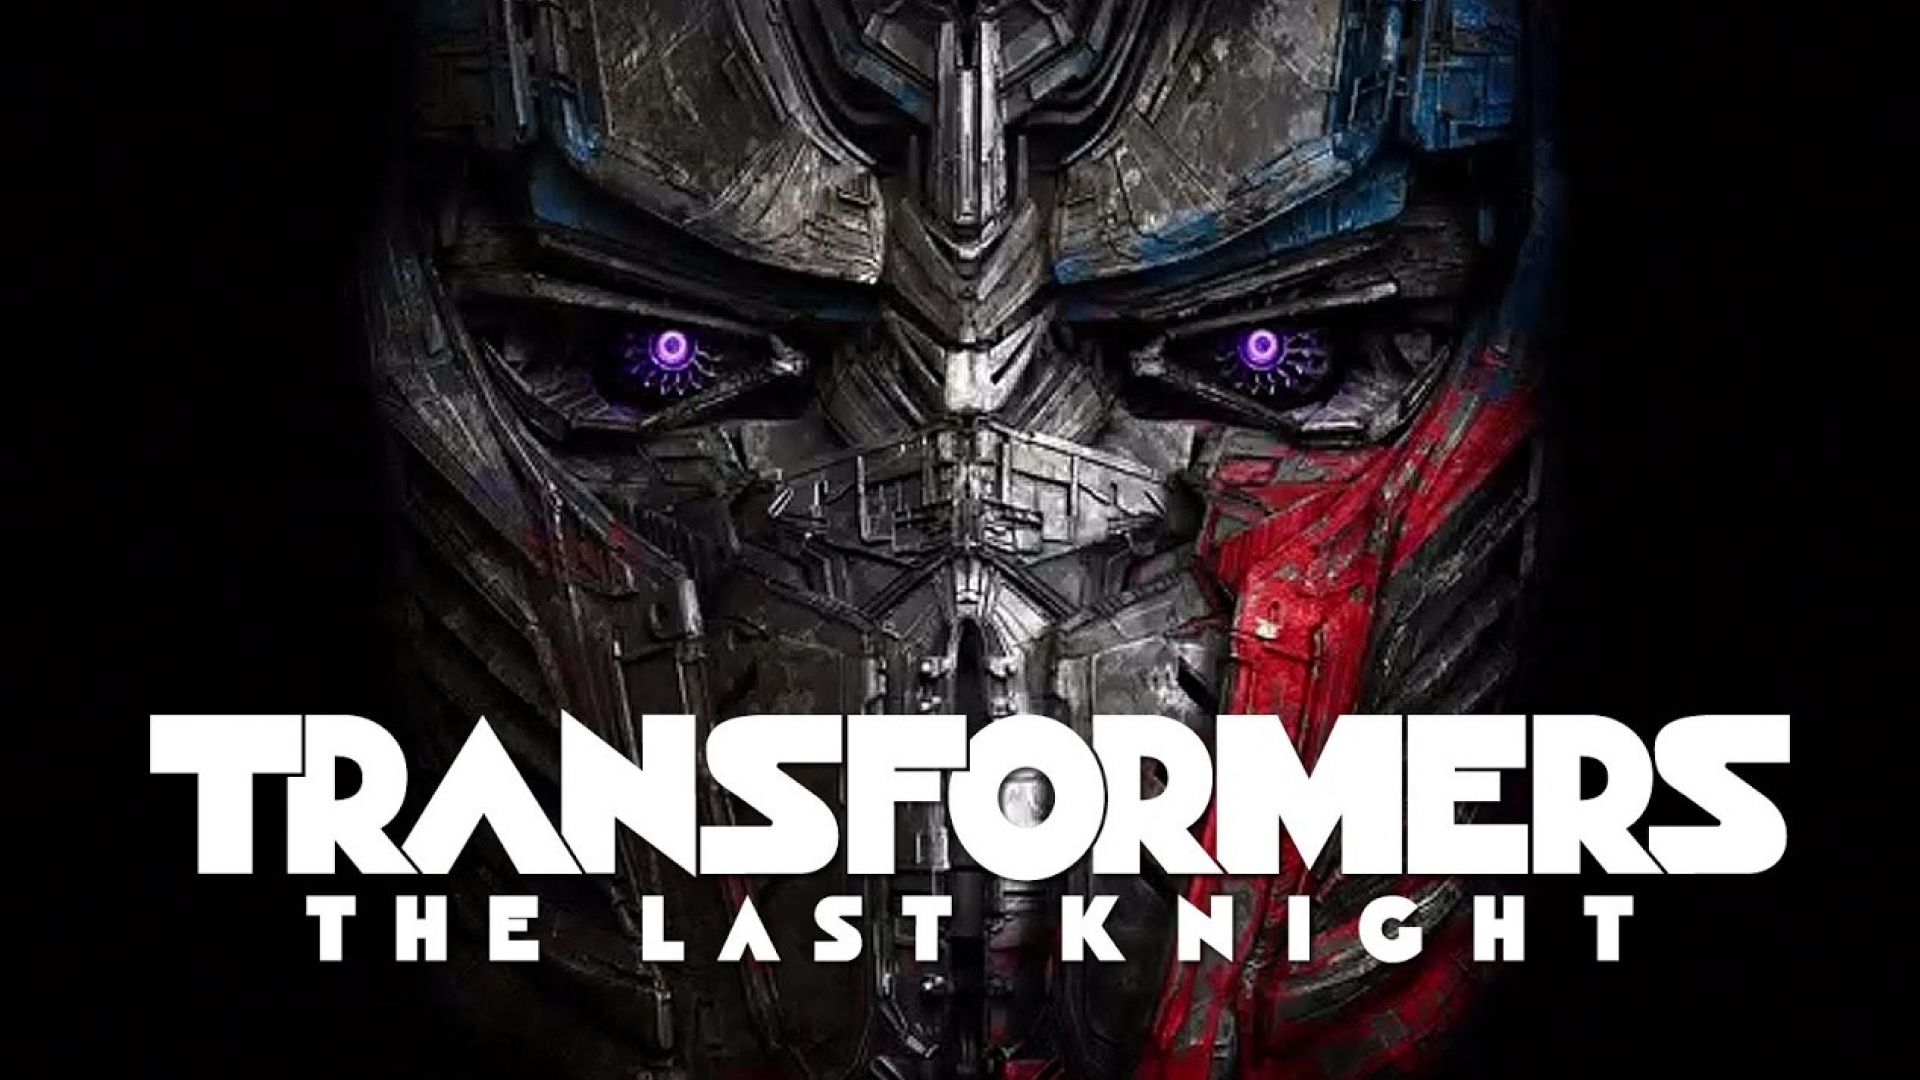 The first trailer for &#039;Transformers: The Last Knight lands w